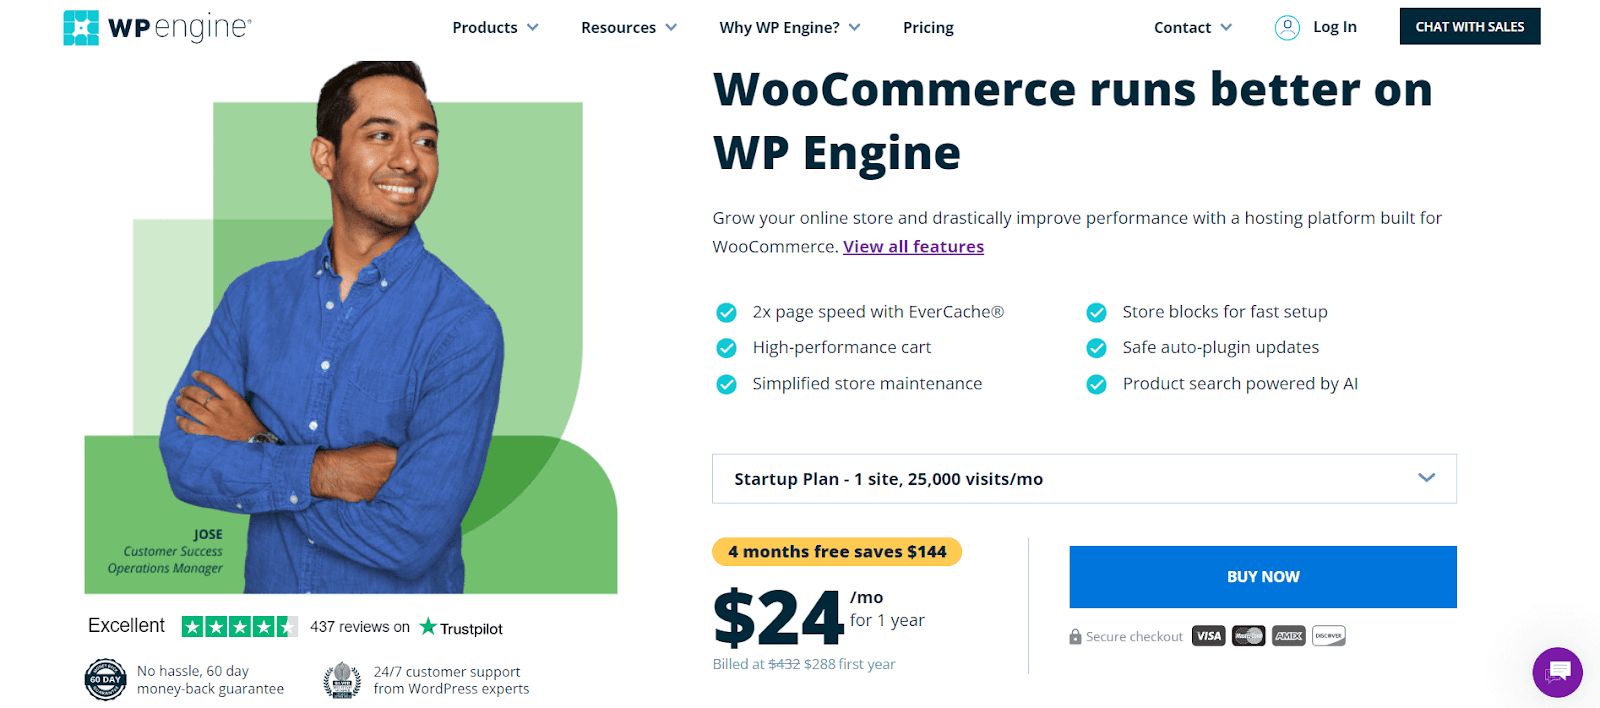 WP Engine offers strong security measures like DDoS mitigation, making it one of the best hosting for WooCommerce platforms.